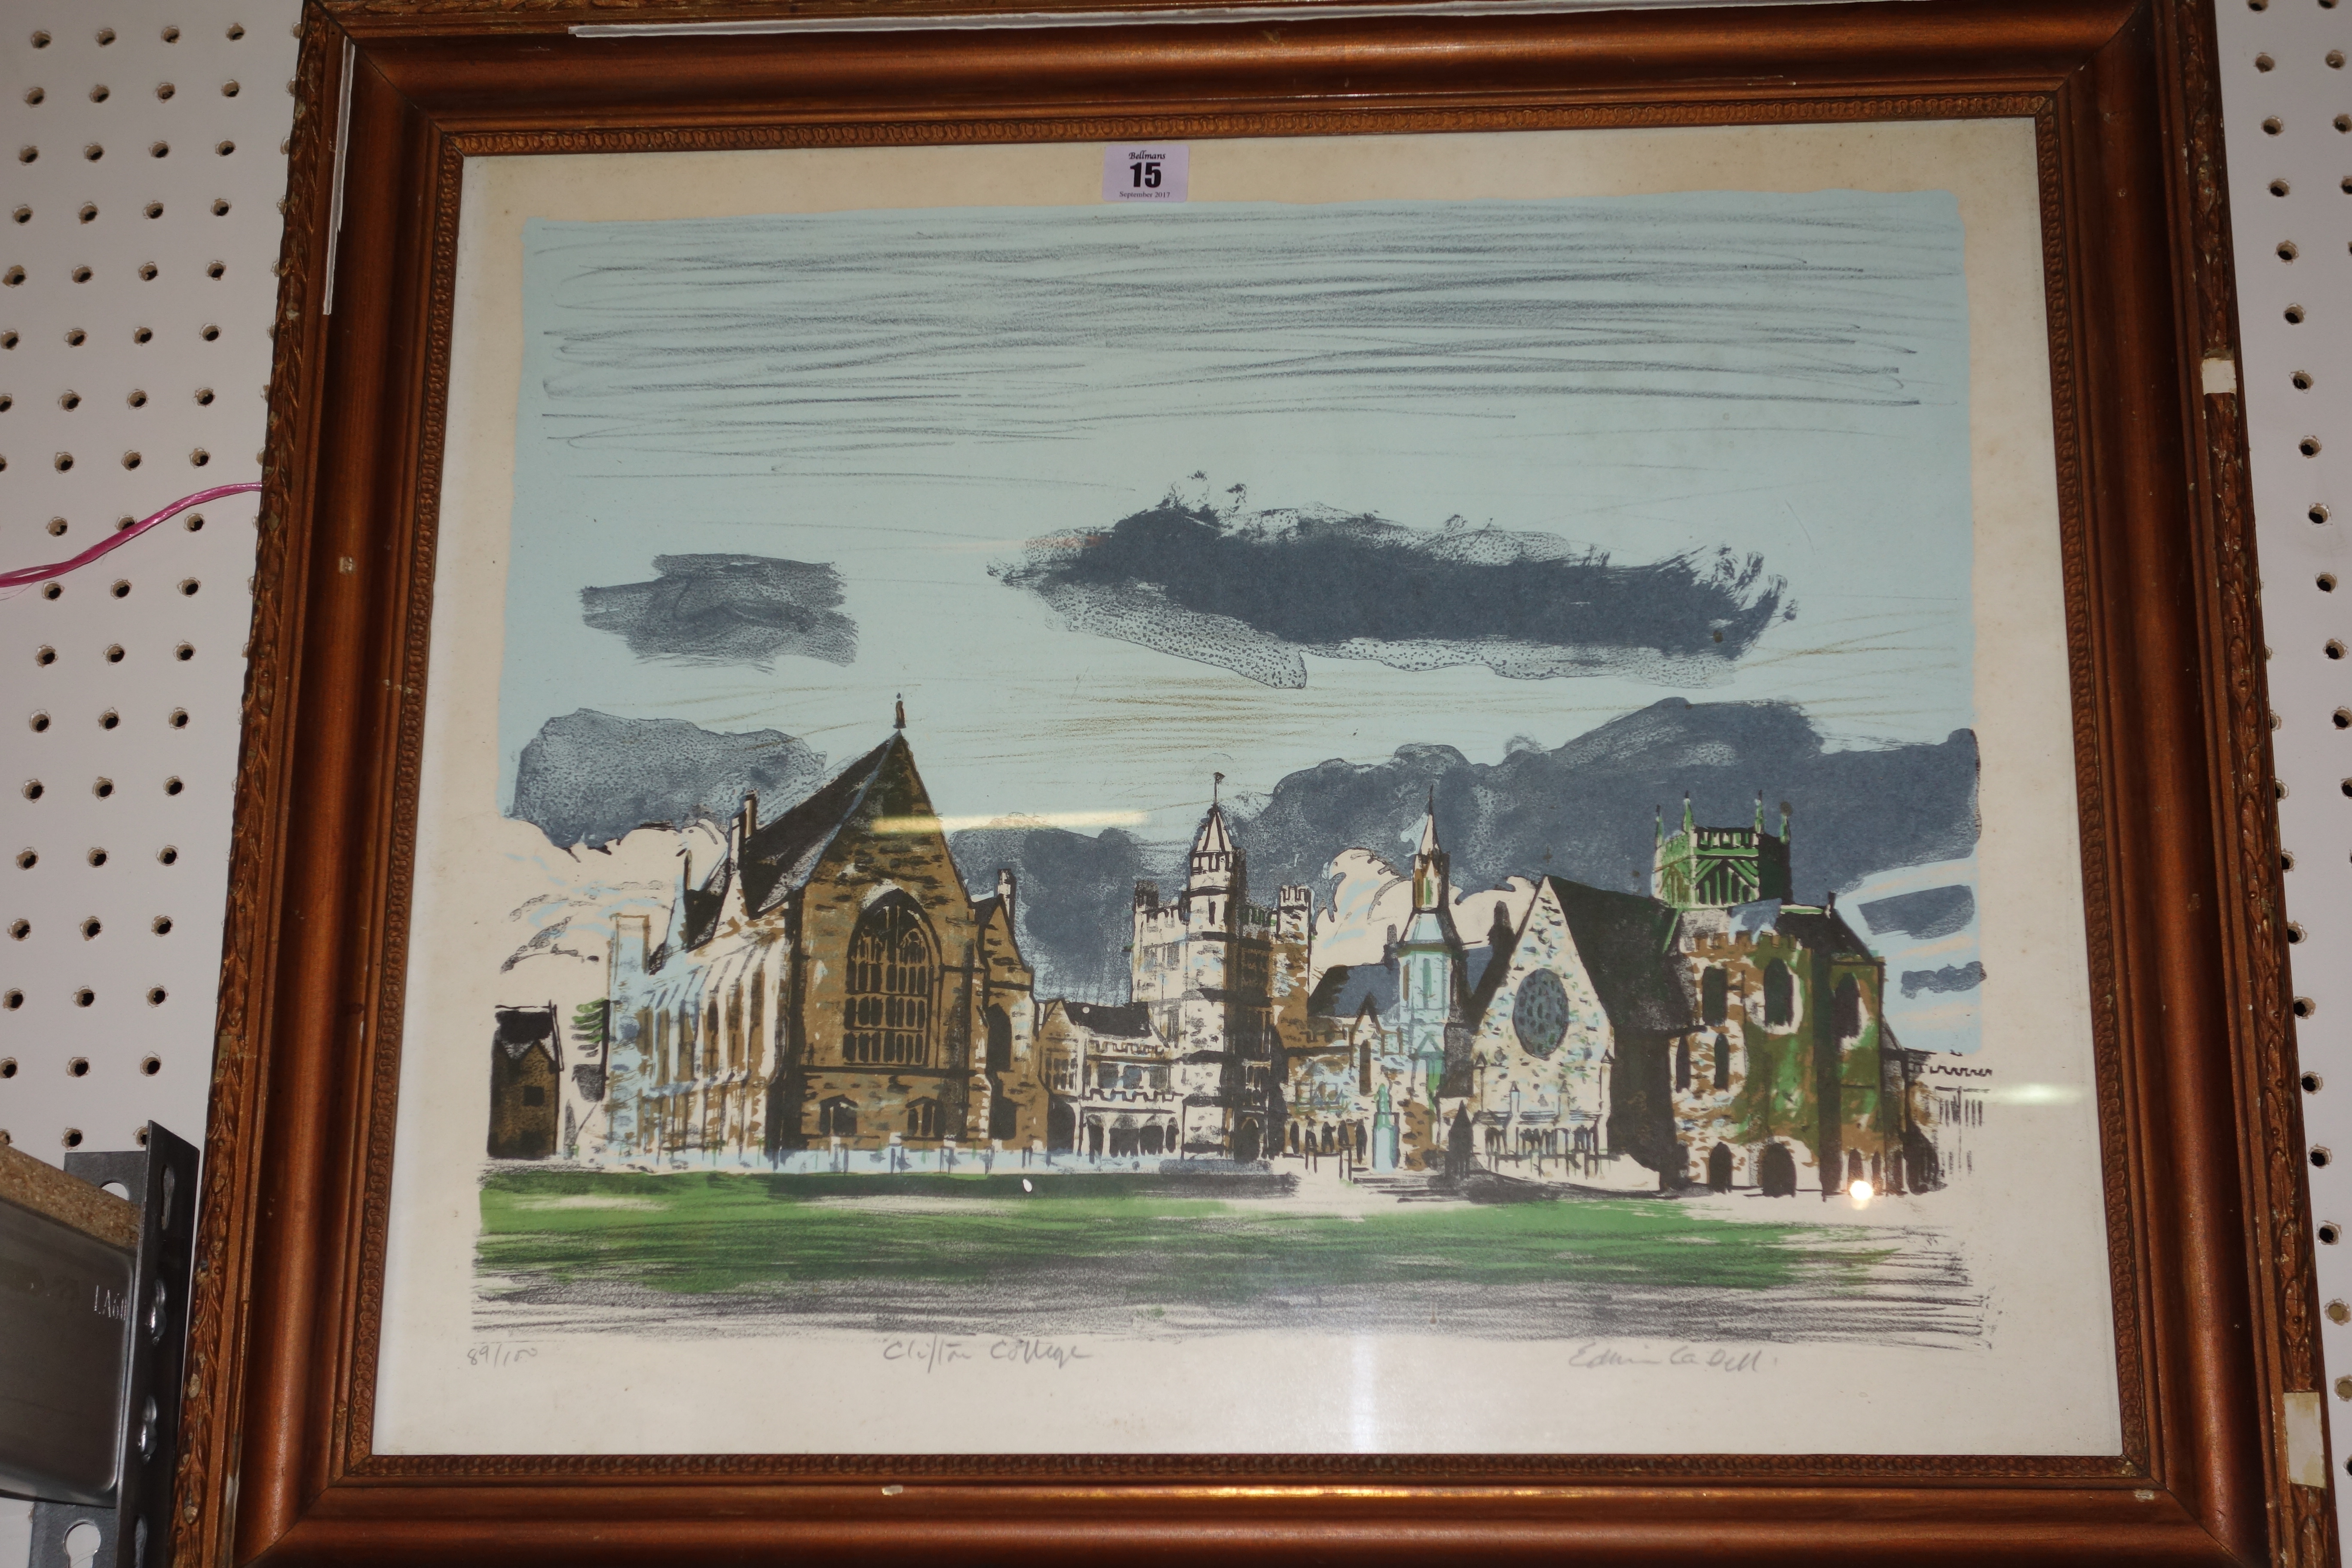 Edwin La Dell (1914-1970), Clifton College, colour lithograph, signed, inscribed and numbered 89/100, 46.5cm x 57cm.   M1